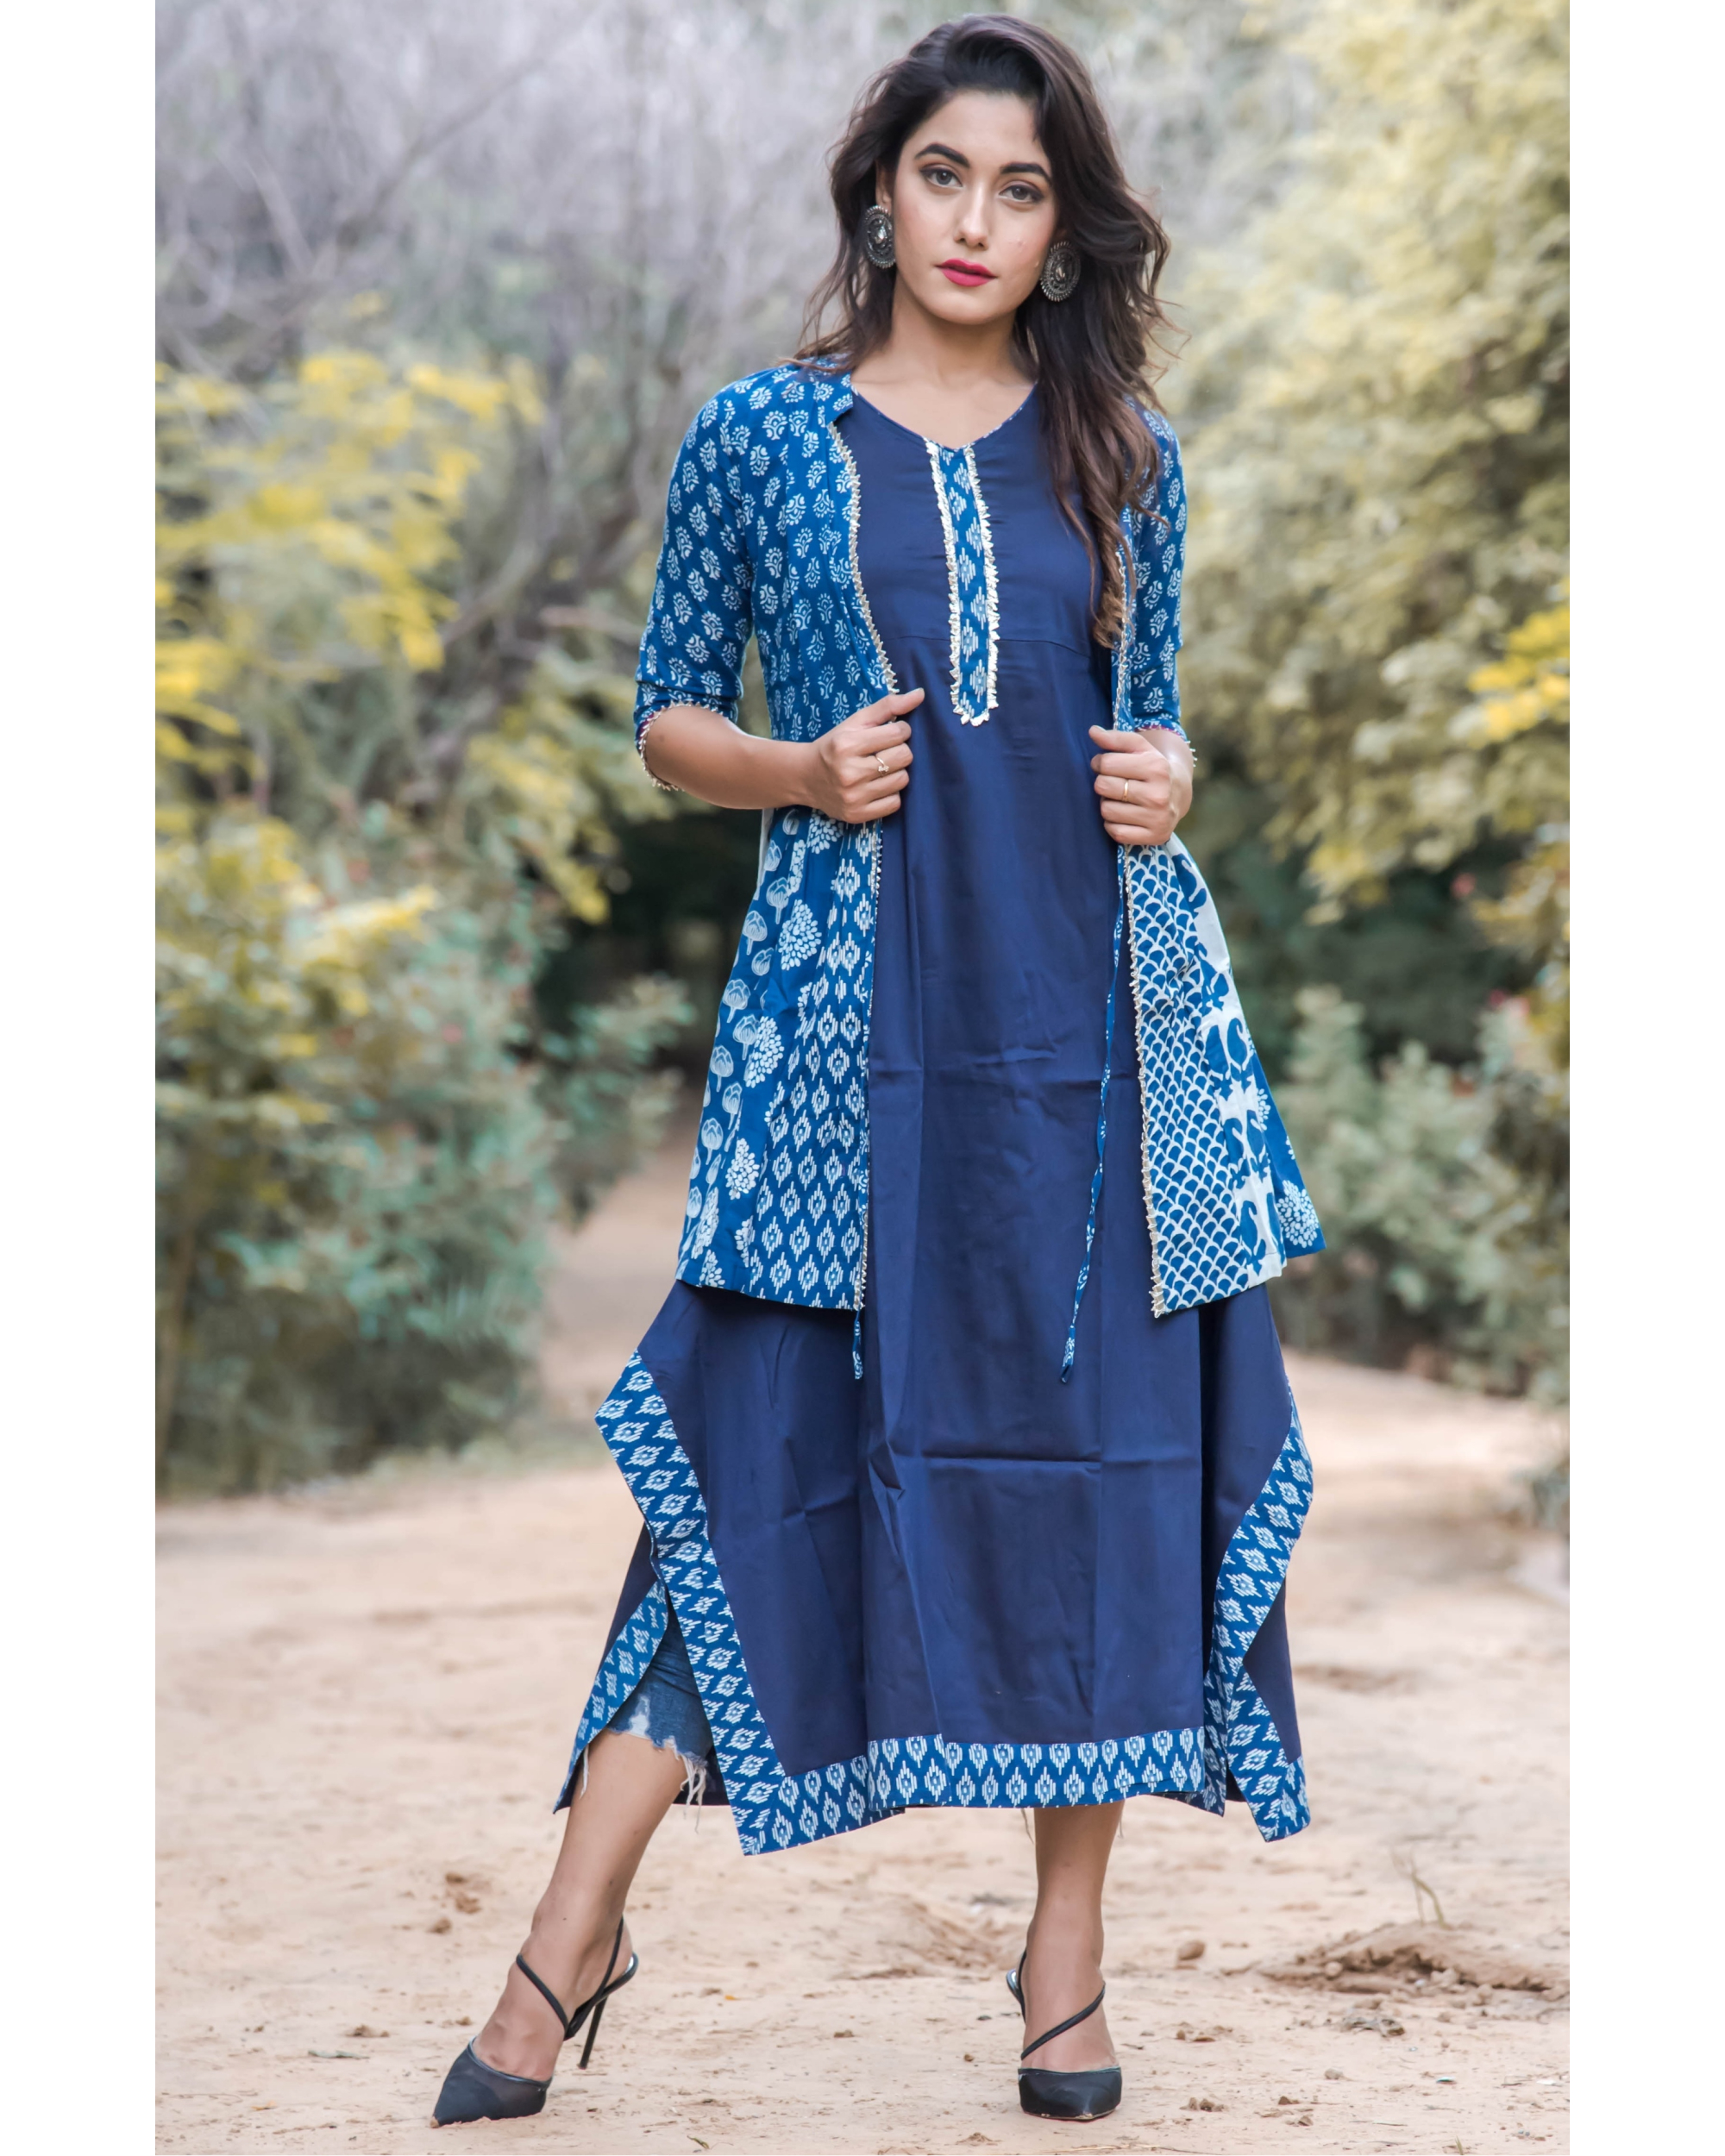 Blue gypsy tunic with jacket - set of two by Kaaj | The Secret Label